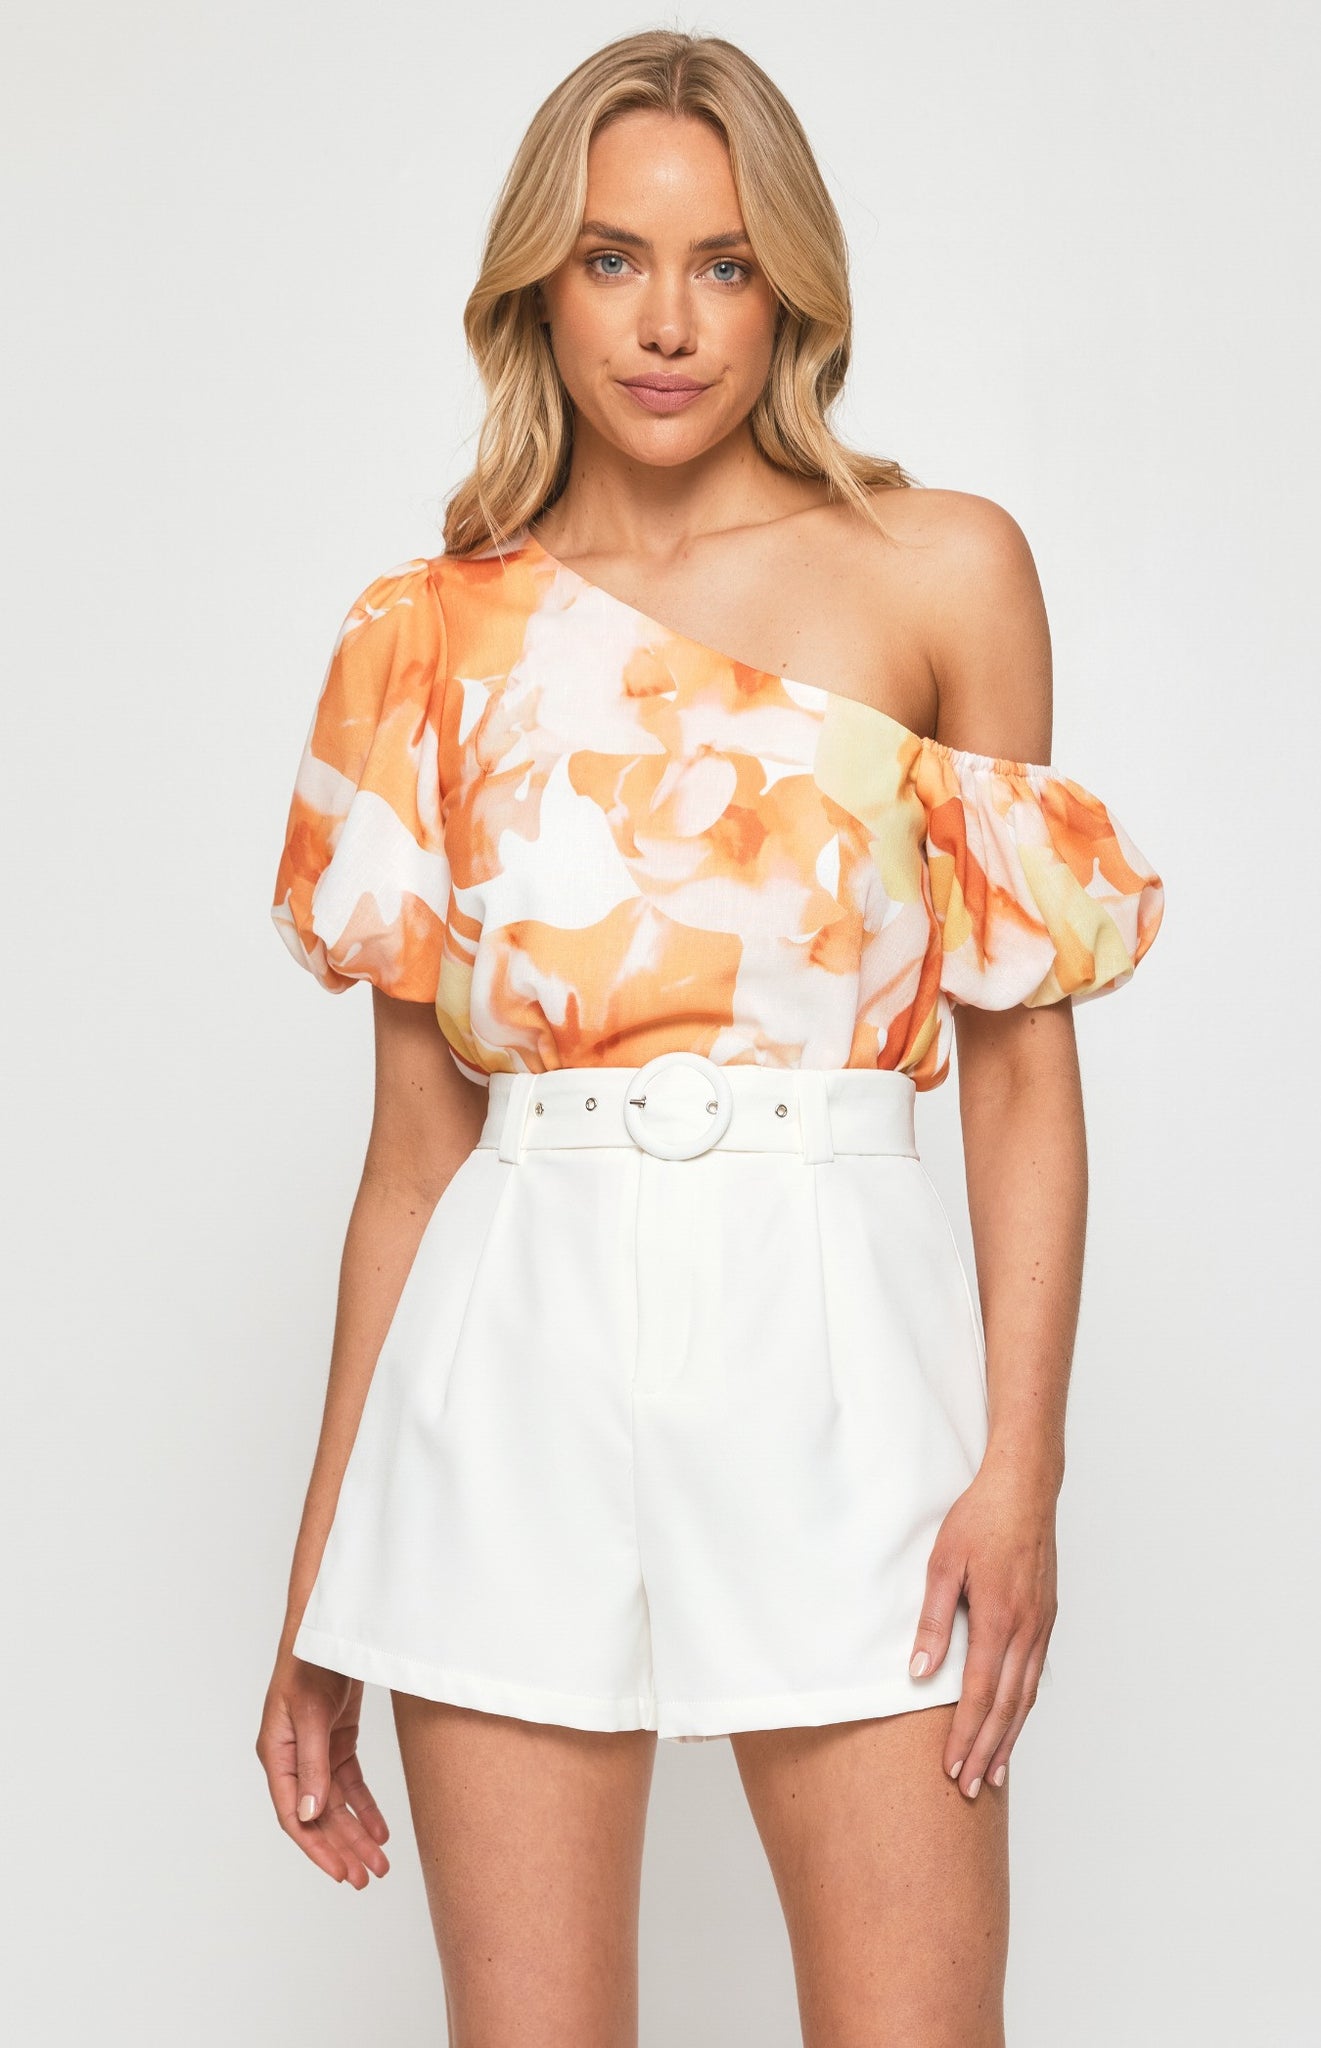 Style State Abstract Print Top - Orange  STO612A